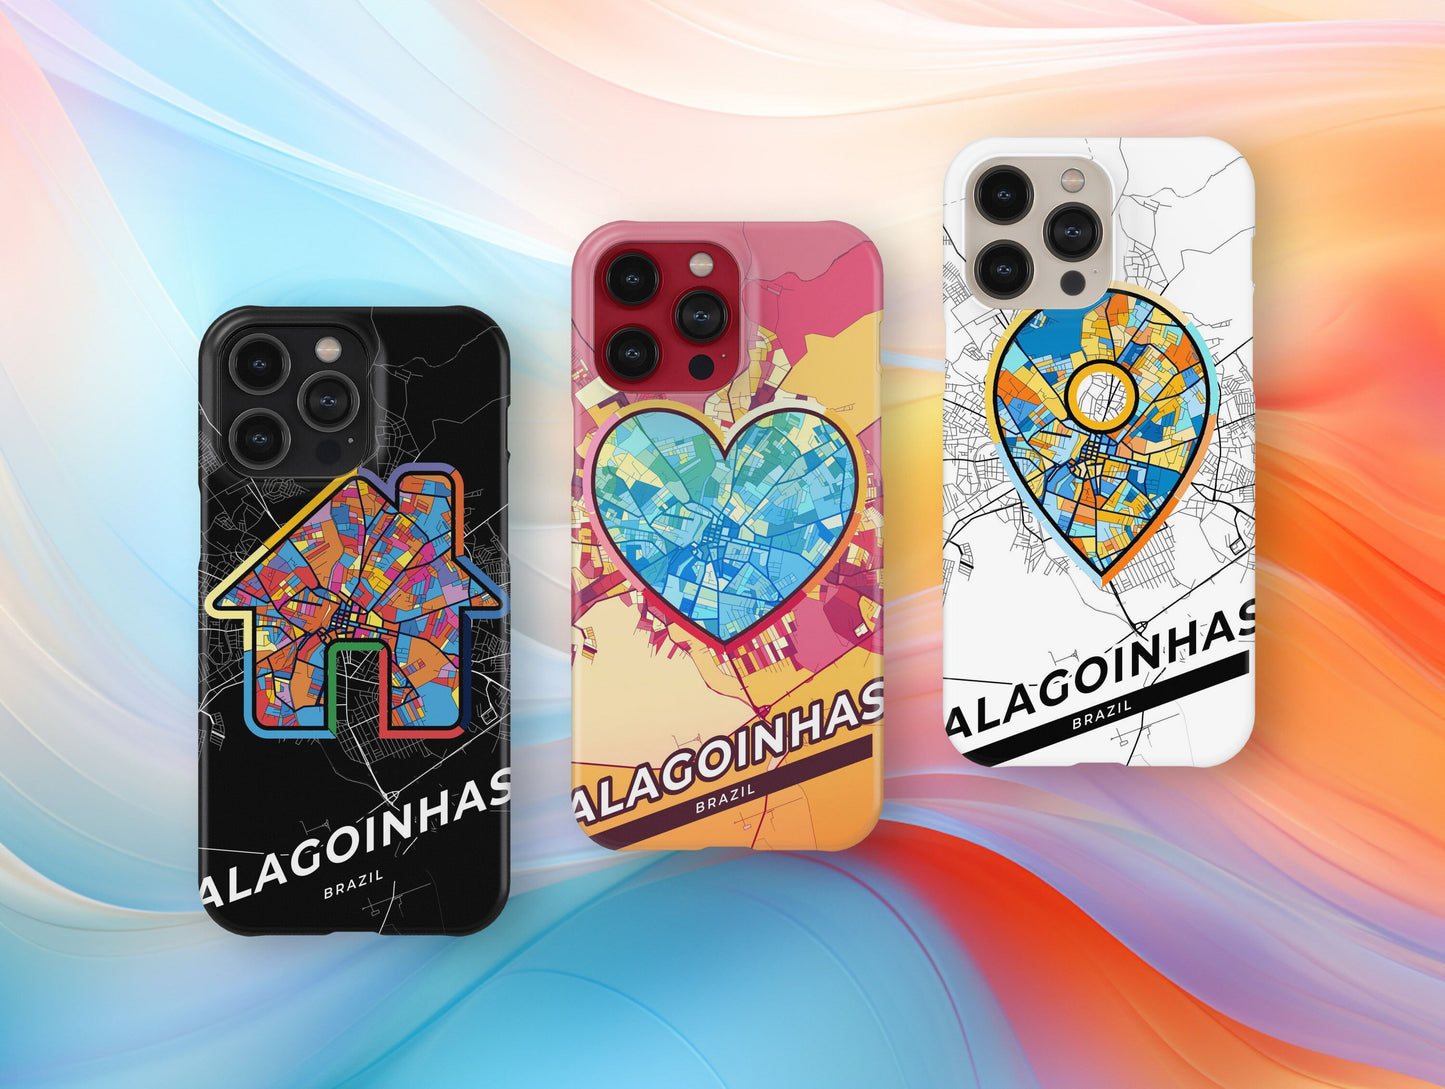 Alagoinhas Brazil slim phone case with colorful icon. Birthday, wedding or housewarming gift. Couple match cases.